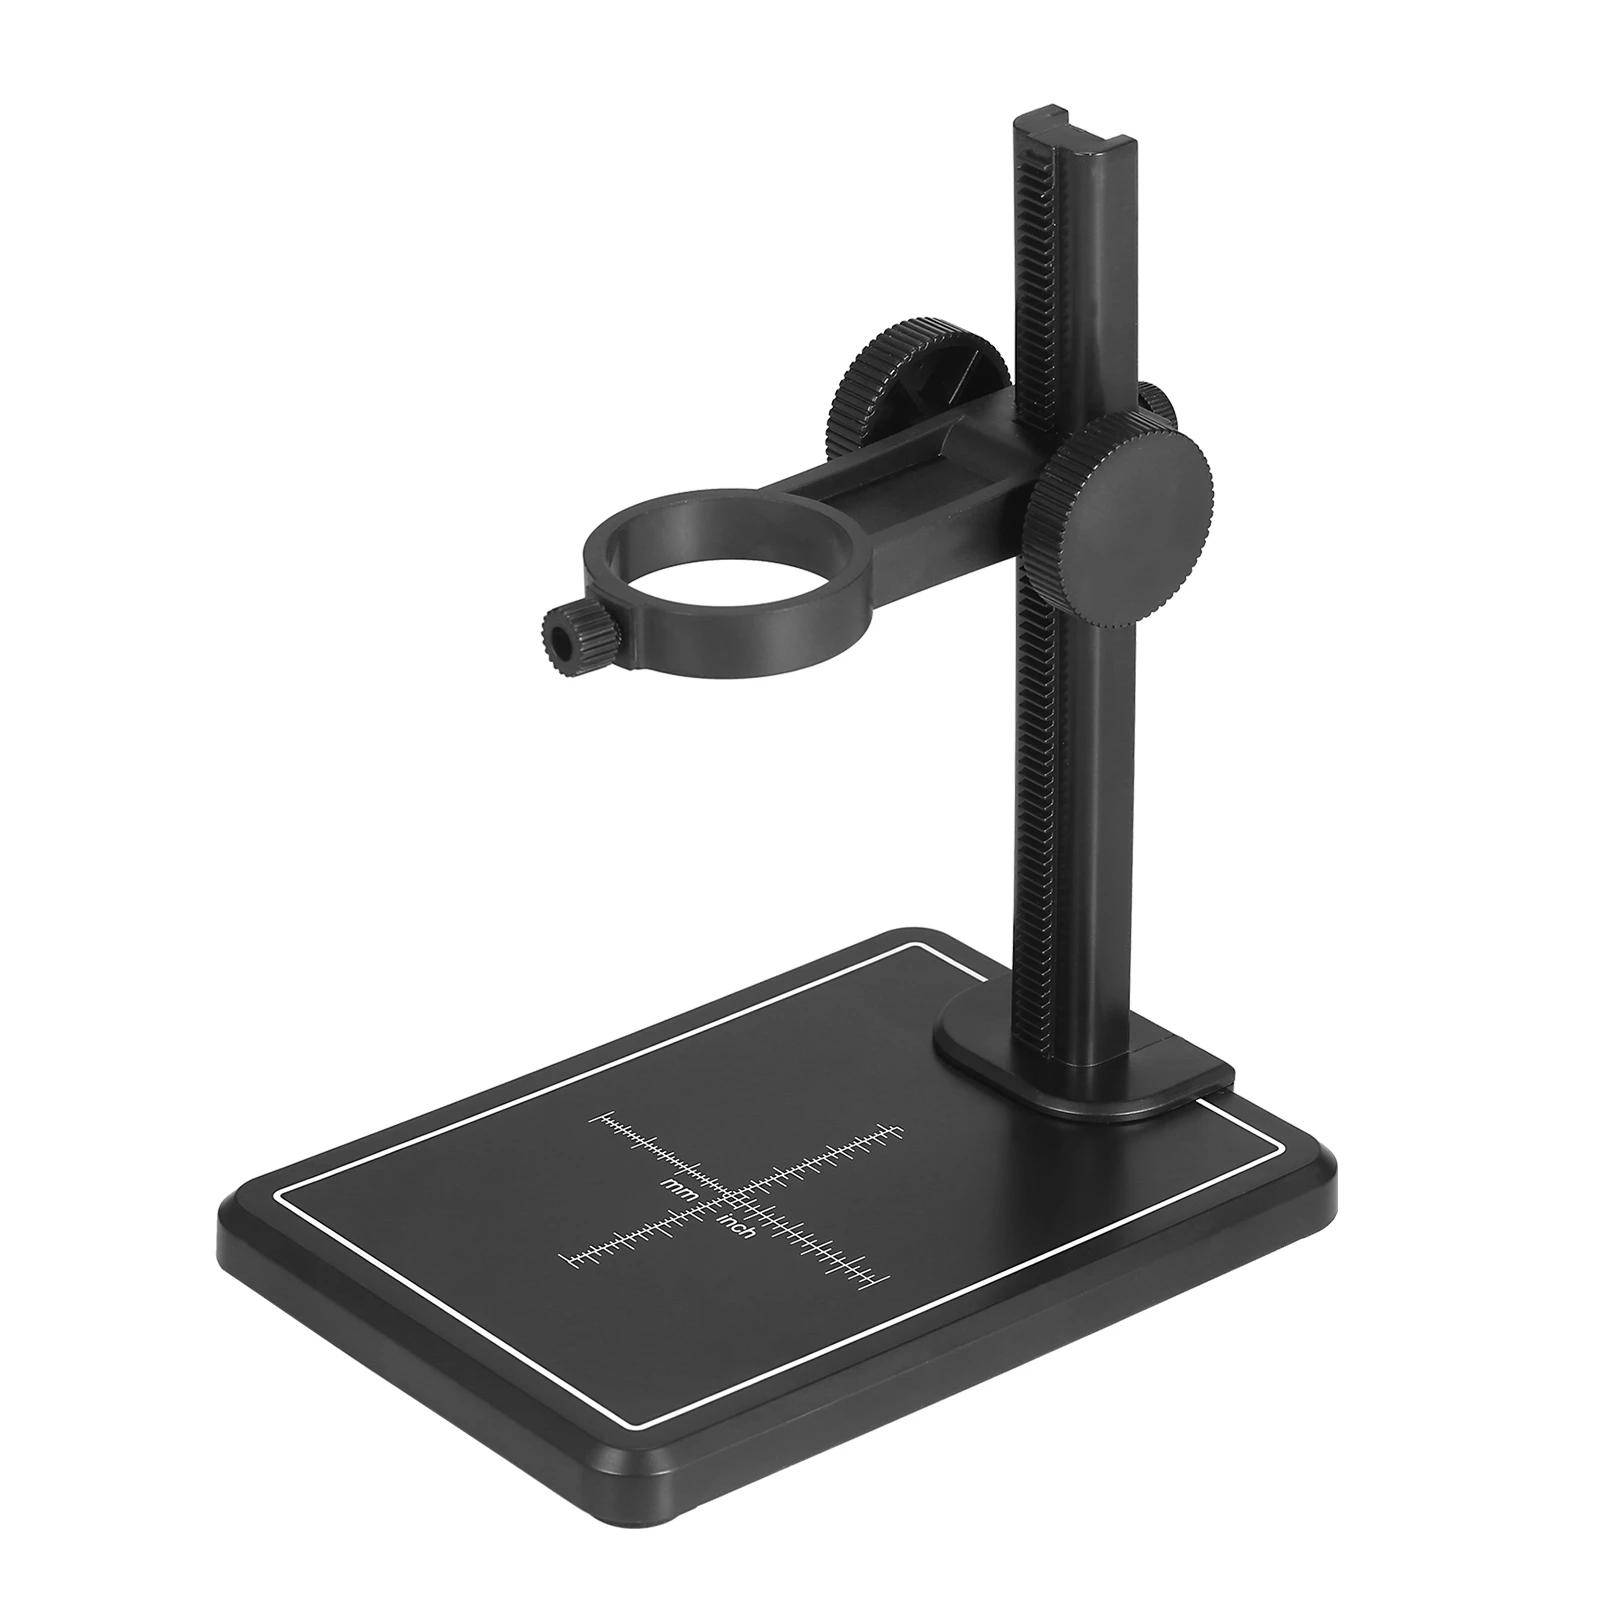 Digital Microscope Stand Magnifier Camera Up and Down Adjustable Stand Holder Universal Support Bracket Large Base with Scales